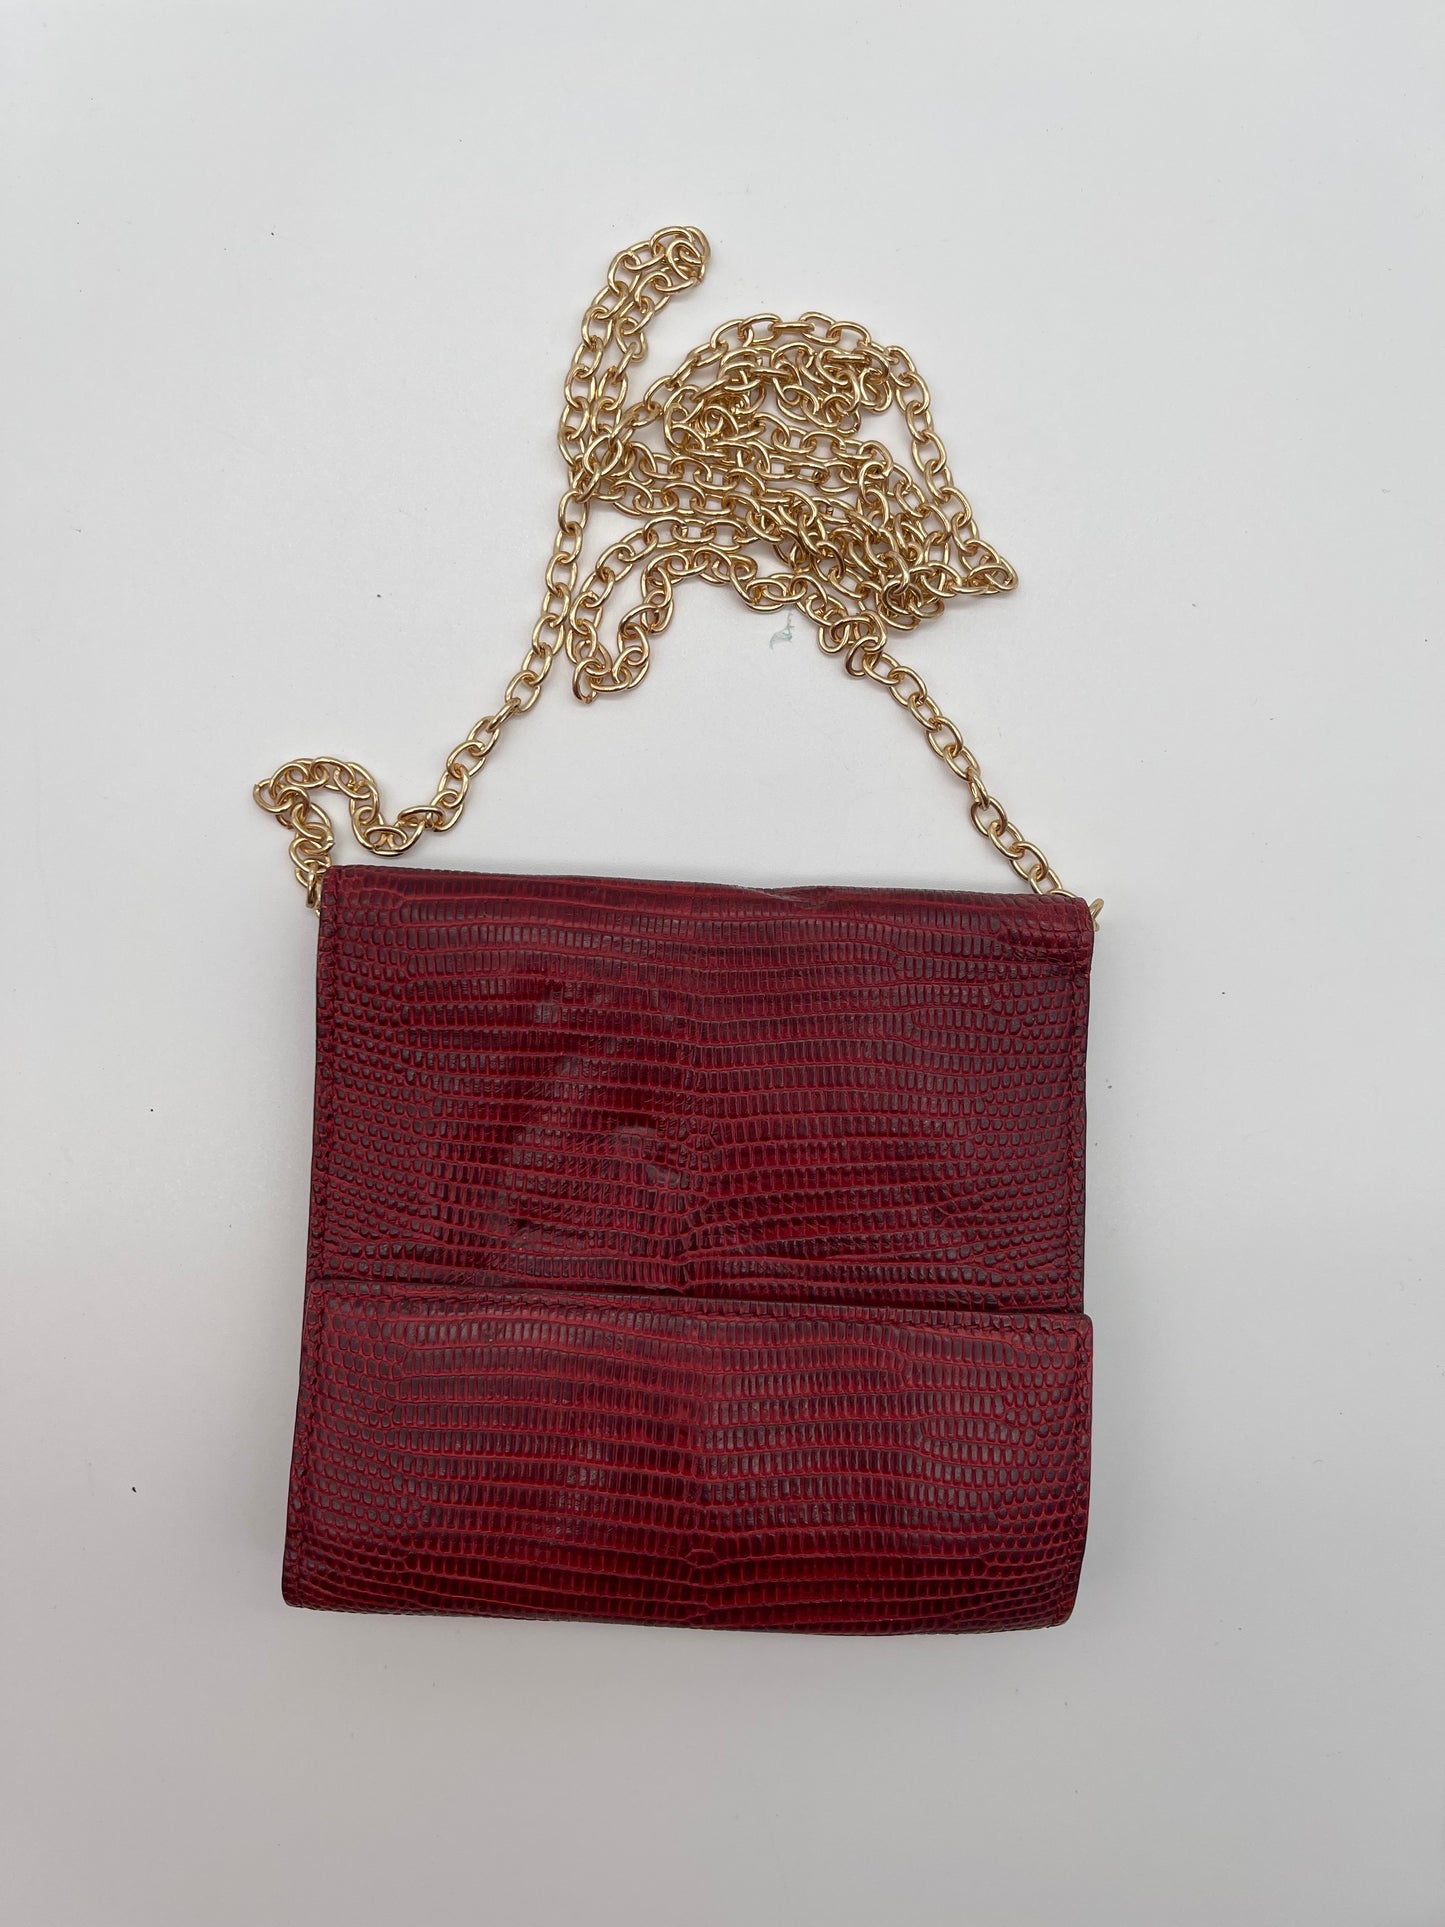 FENDI mini wallet with added chain strap